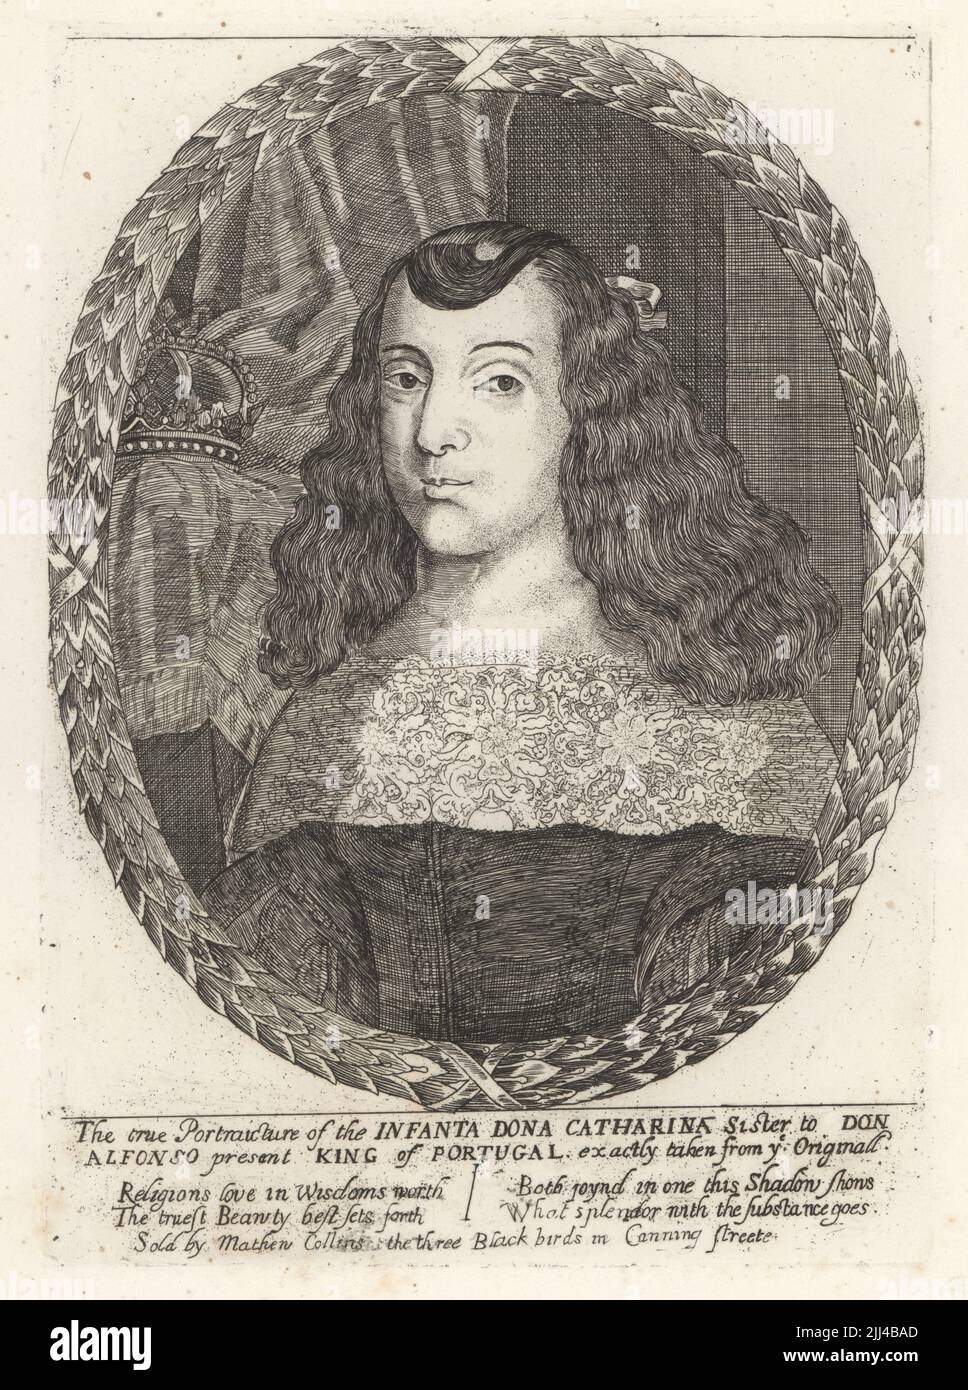 Oval portrait of Catherine of Braganza, 1638-1705, later Queen of England, Scotland and Ireland on her marriage in 1662 to King Charles II. Aged about 22, dressed in the Portuguese court style, with a crown on a cushion behind her. Infanta Dona Catharina, sister to Don Alfonso, King of Portugal. From a rare print sold by Mathew Collins, the Three Black Birds, Canning Streete. Copperplate engraving after a painting by Dirk Stoop from Samuel Woodburn’s Gallery of Rare Portraits Consisting of Original Plates, George Jones, 102 St Martin’s Lane, London, 1816. Stock Photo